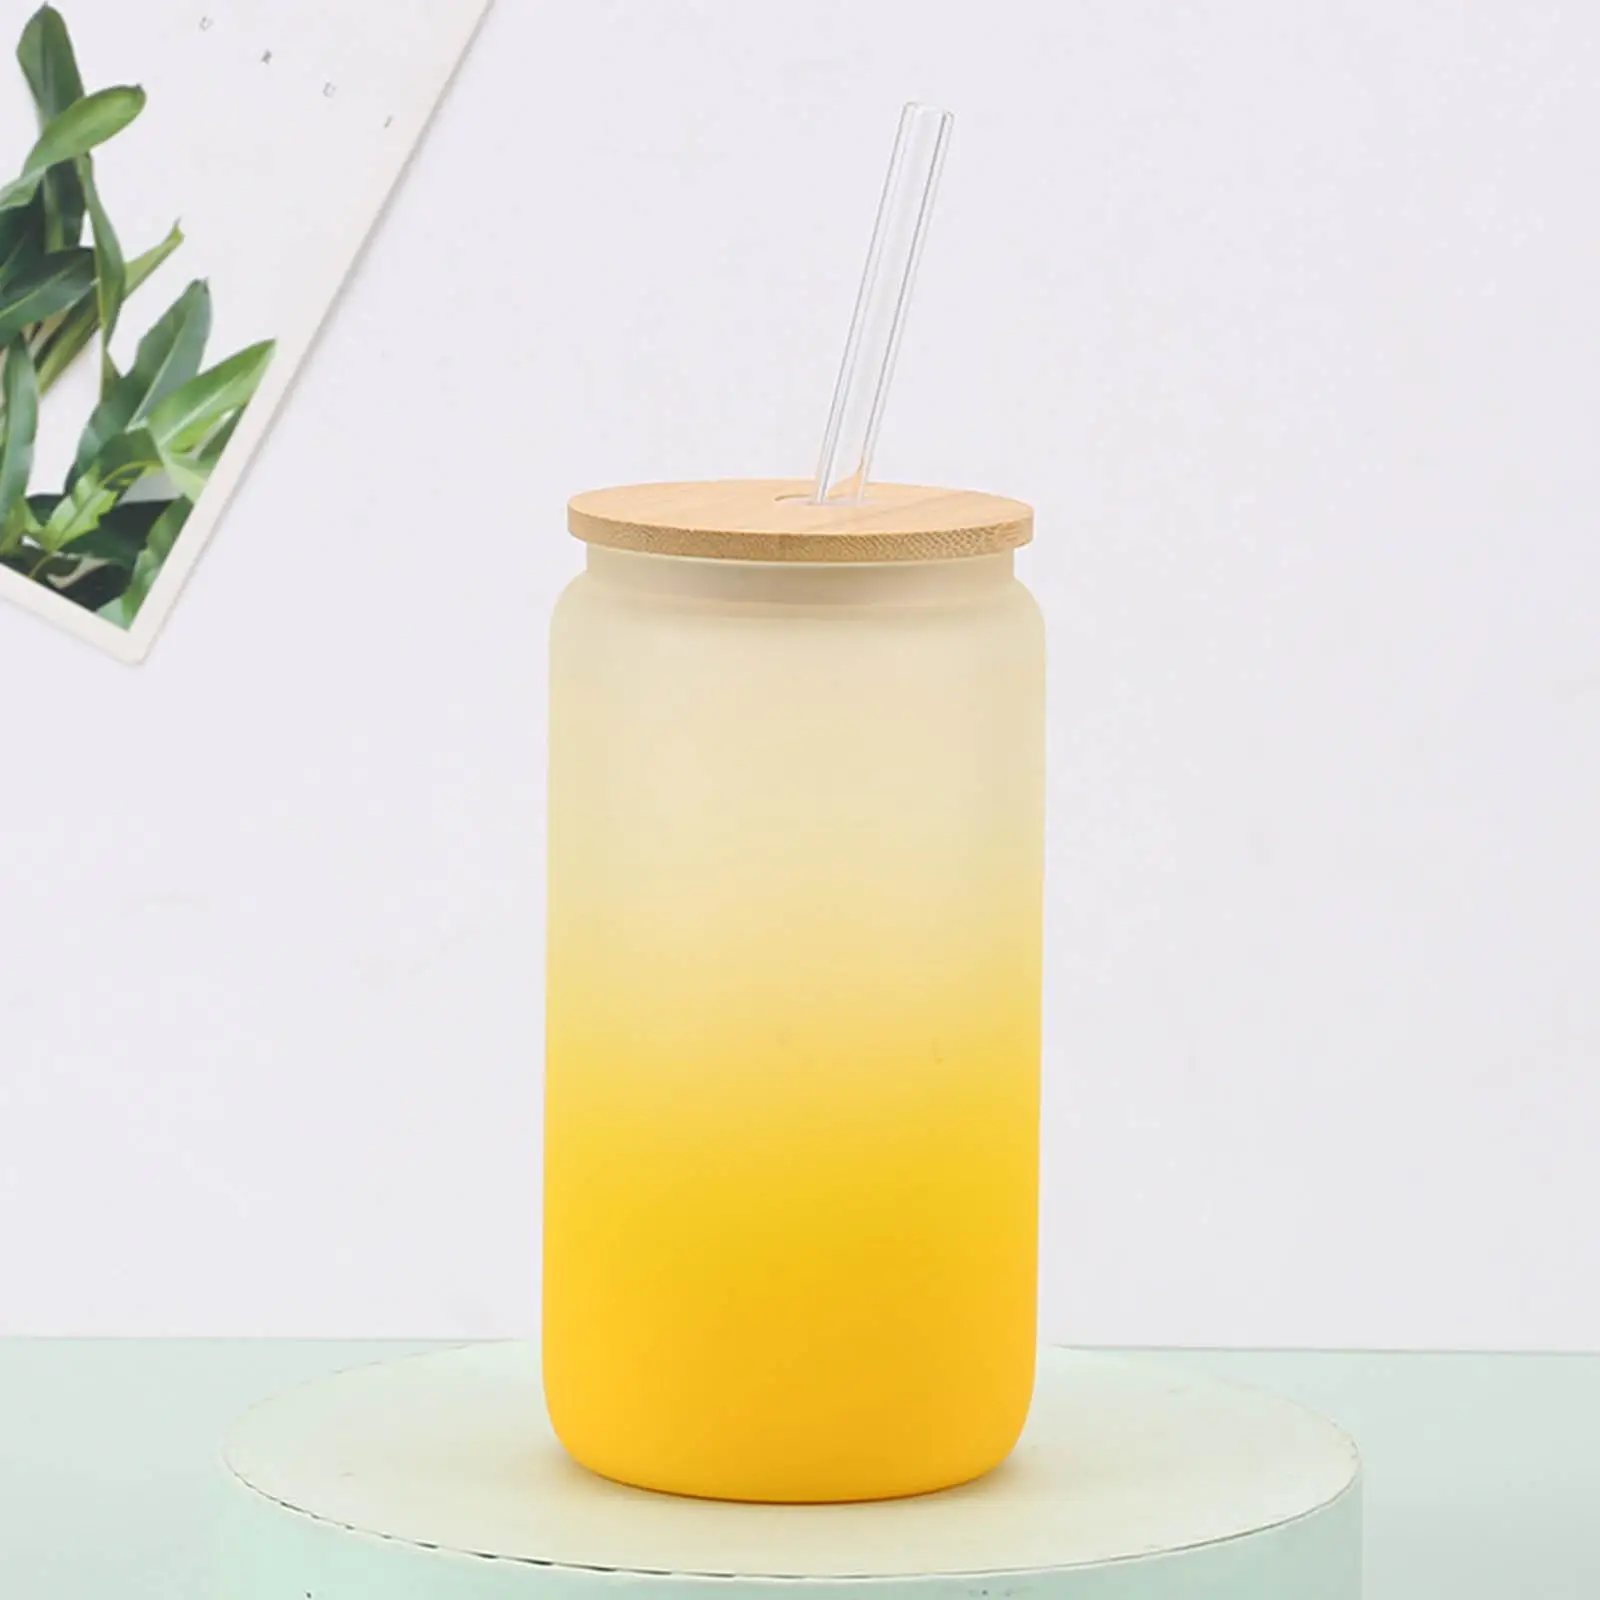 Reusable Boba Cup Juicing Cups Drinking Water Bottle with Lid Tea Cup Glass Mason Cup for Camping Office Travel Shopping Picnic